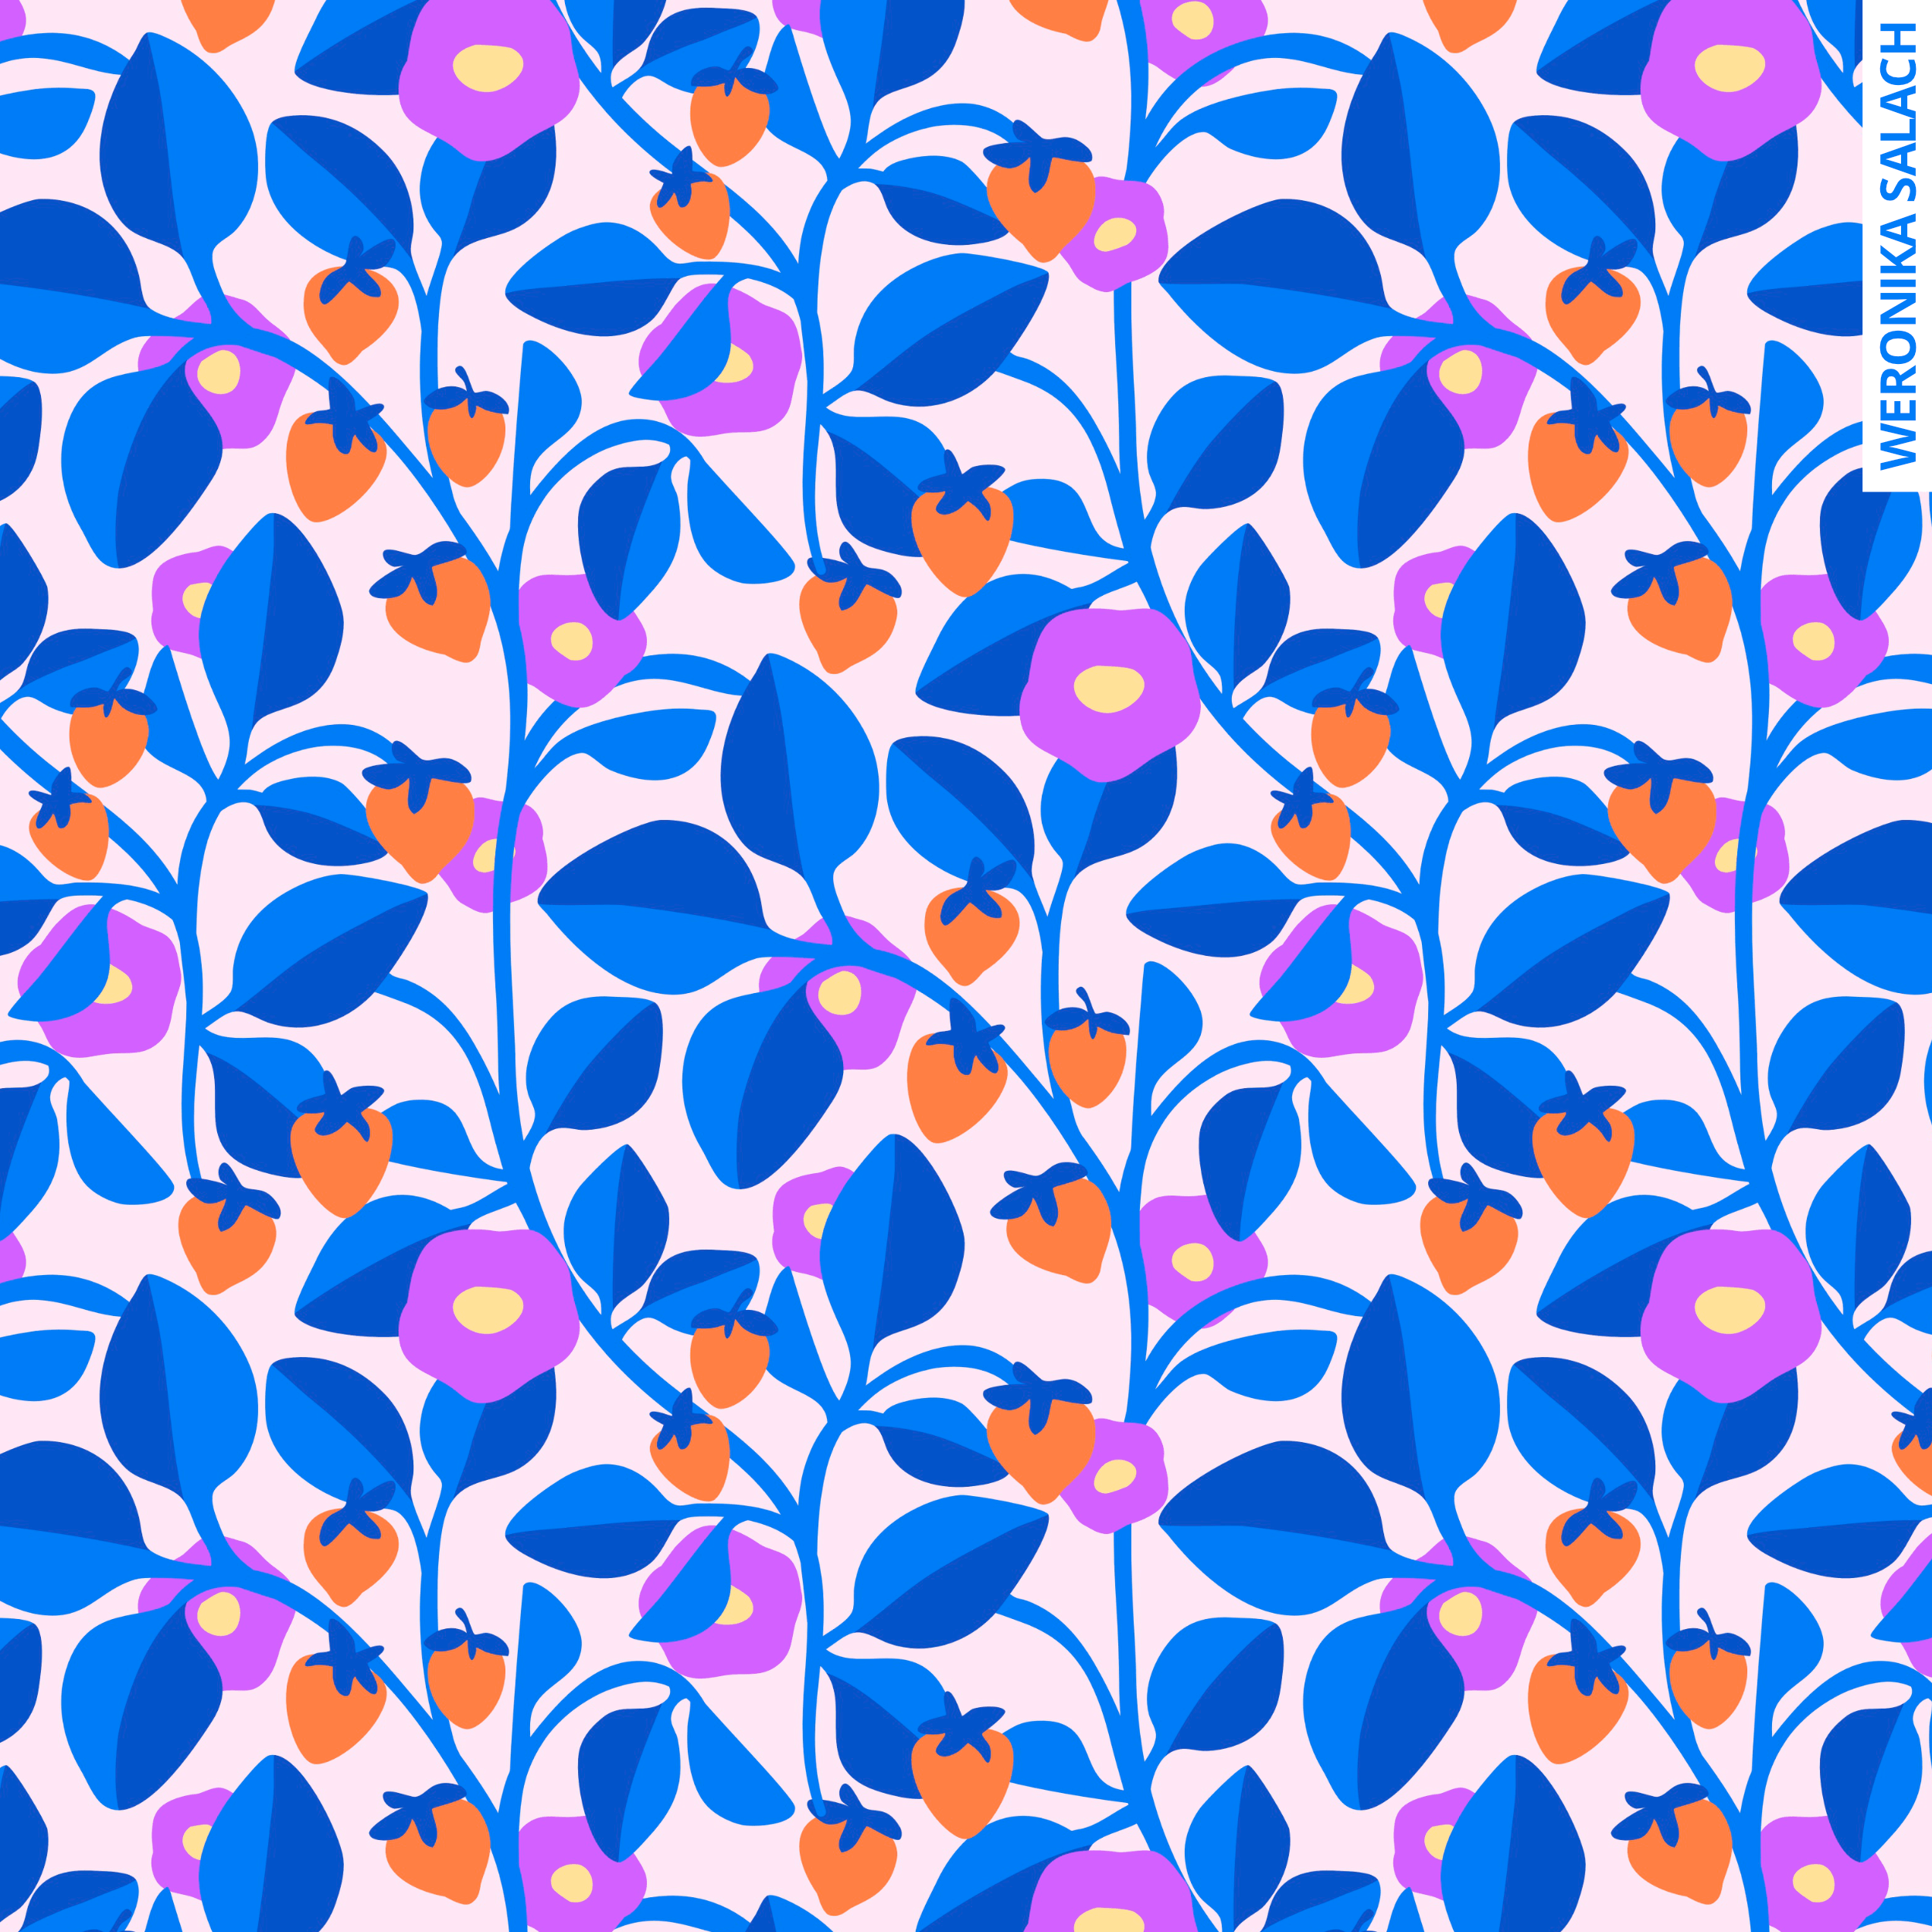 WS_repeat pattern_graphic strawberries.png